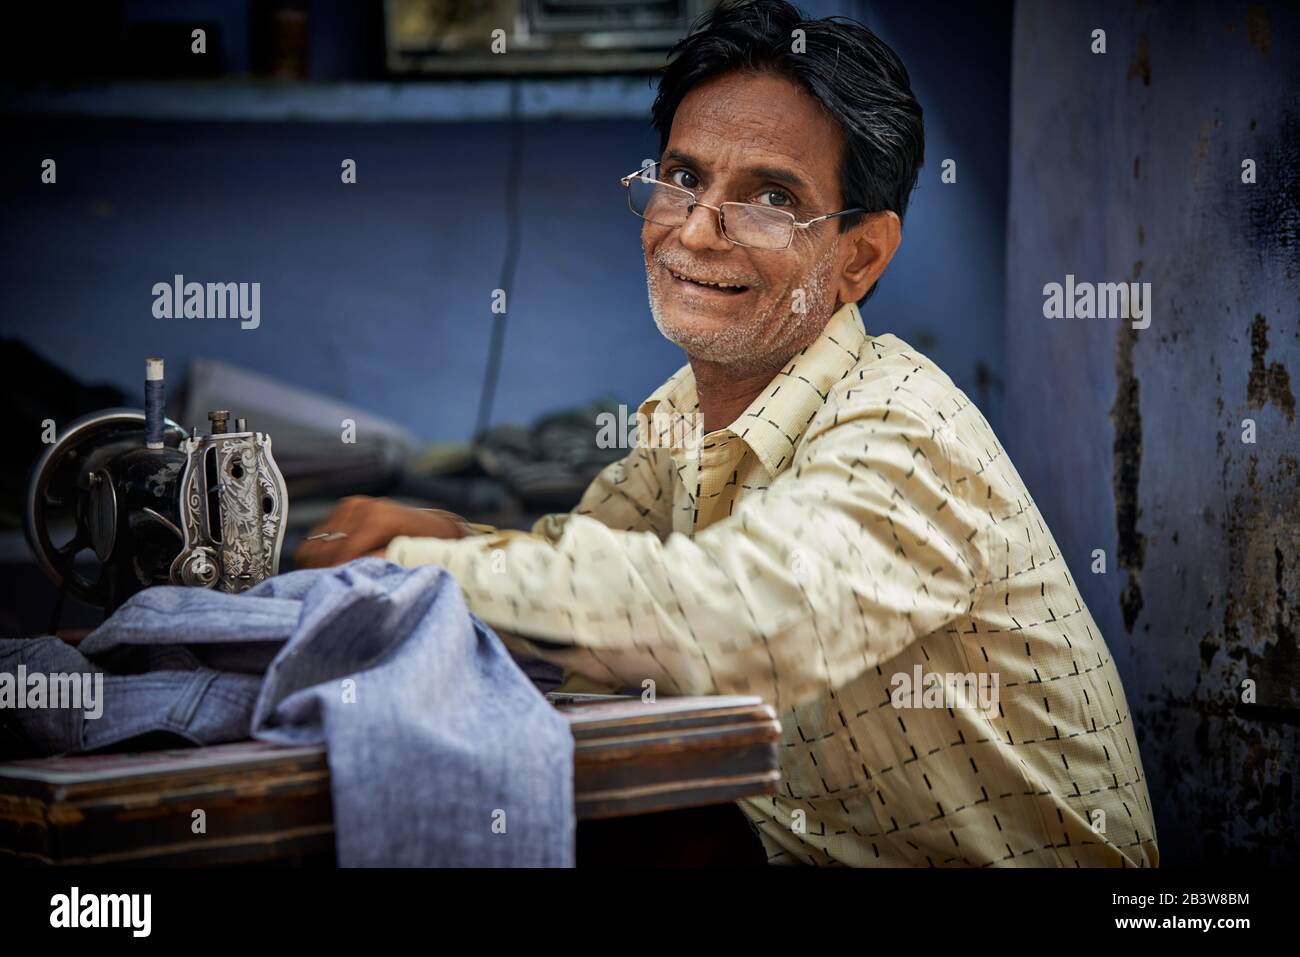 Portrait of a tailor on his sewing machine against a blue background, Bikaner, Rajasthan, India Stock Photo